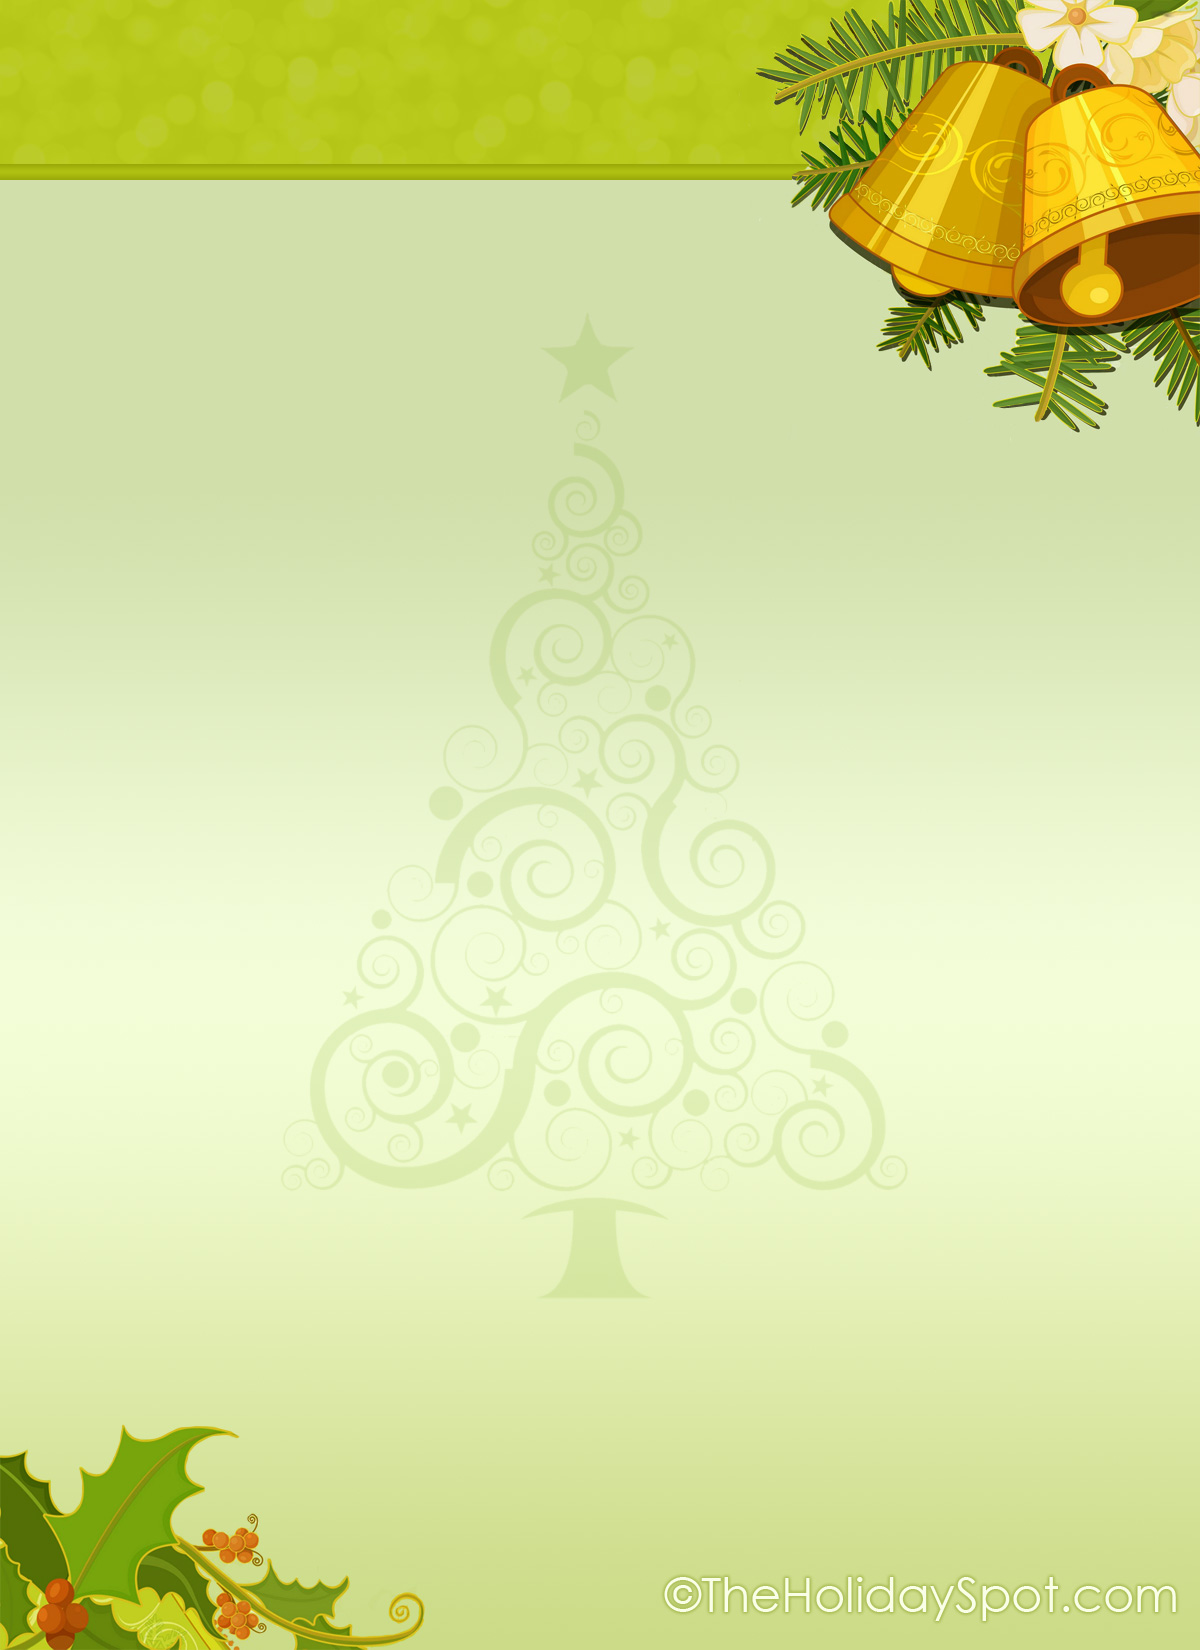 Christmas Letterheads - Background Images For Christmas Invitations , HD Wallpaper & Backgrounds